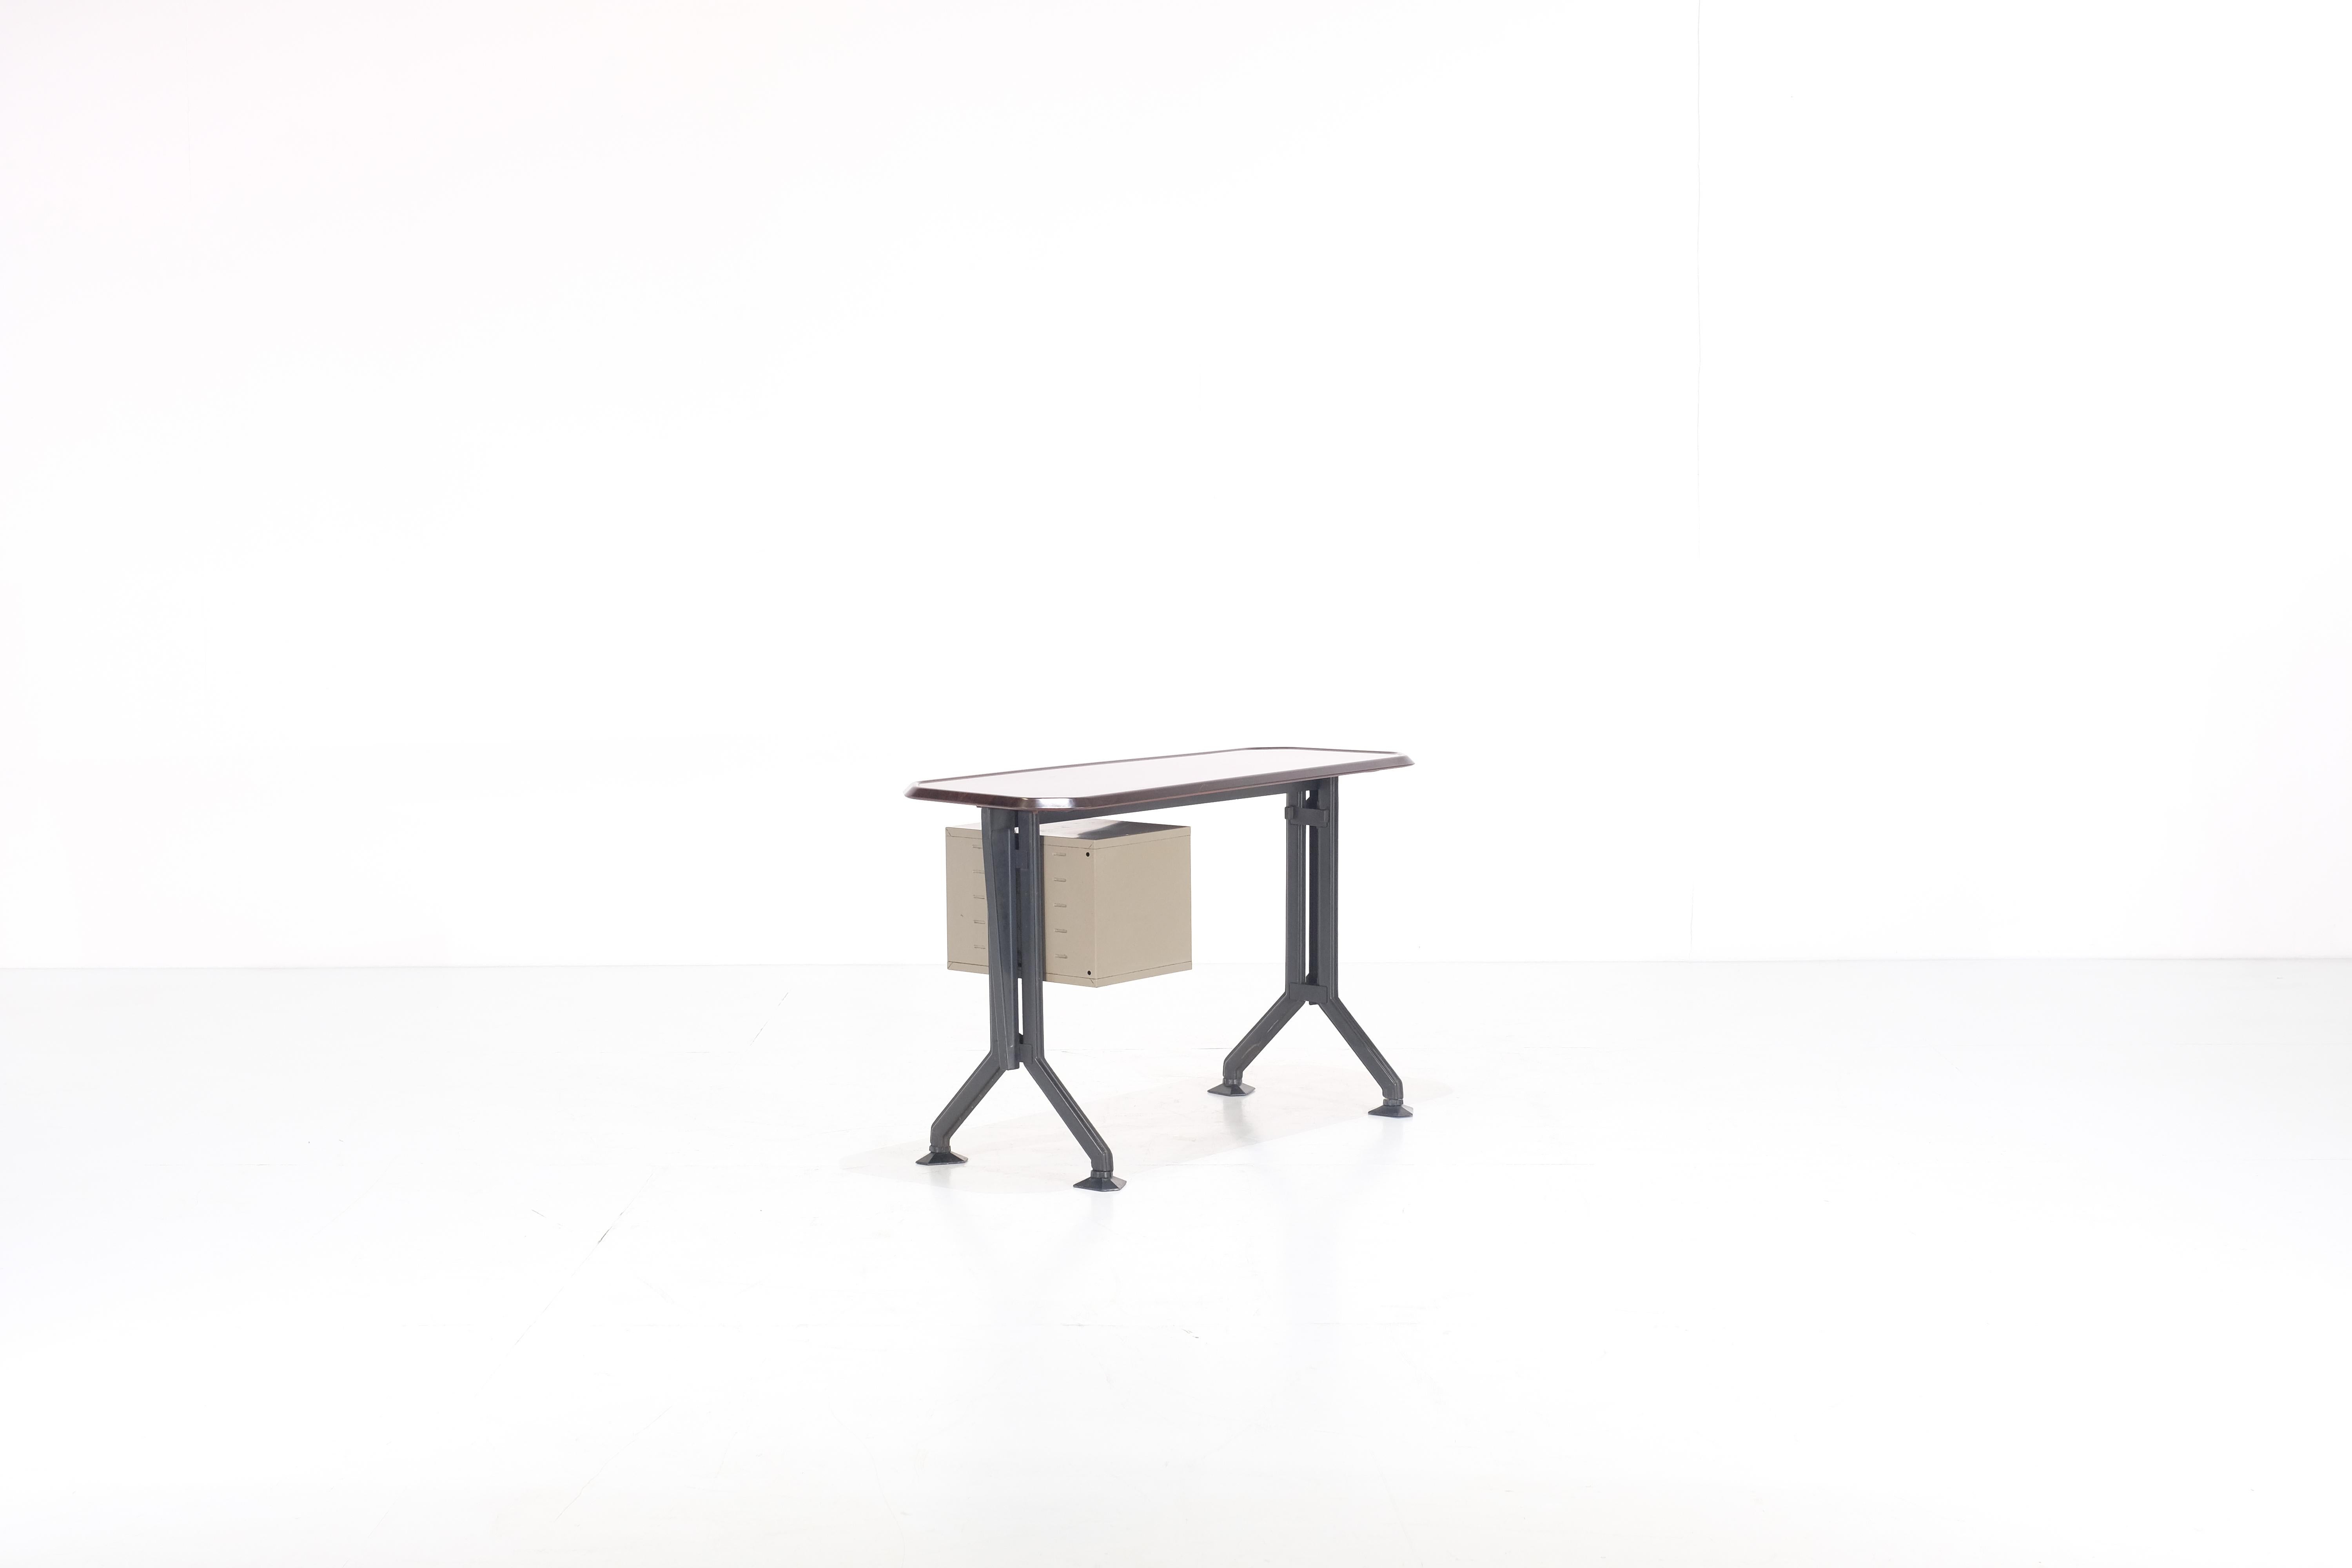 Mid-20th Century Arco Desk by BBPR for Olivetti Synthesis - 1960s For Sale